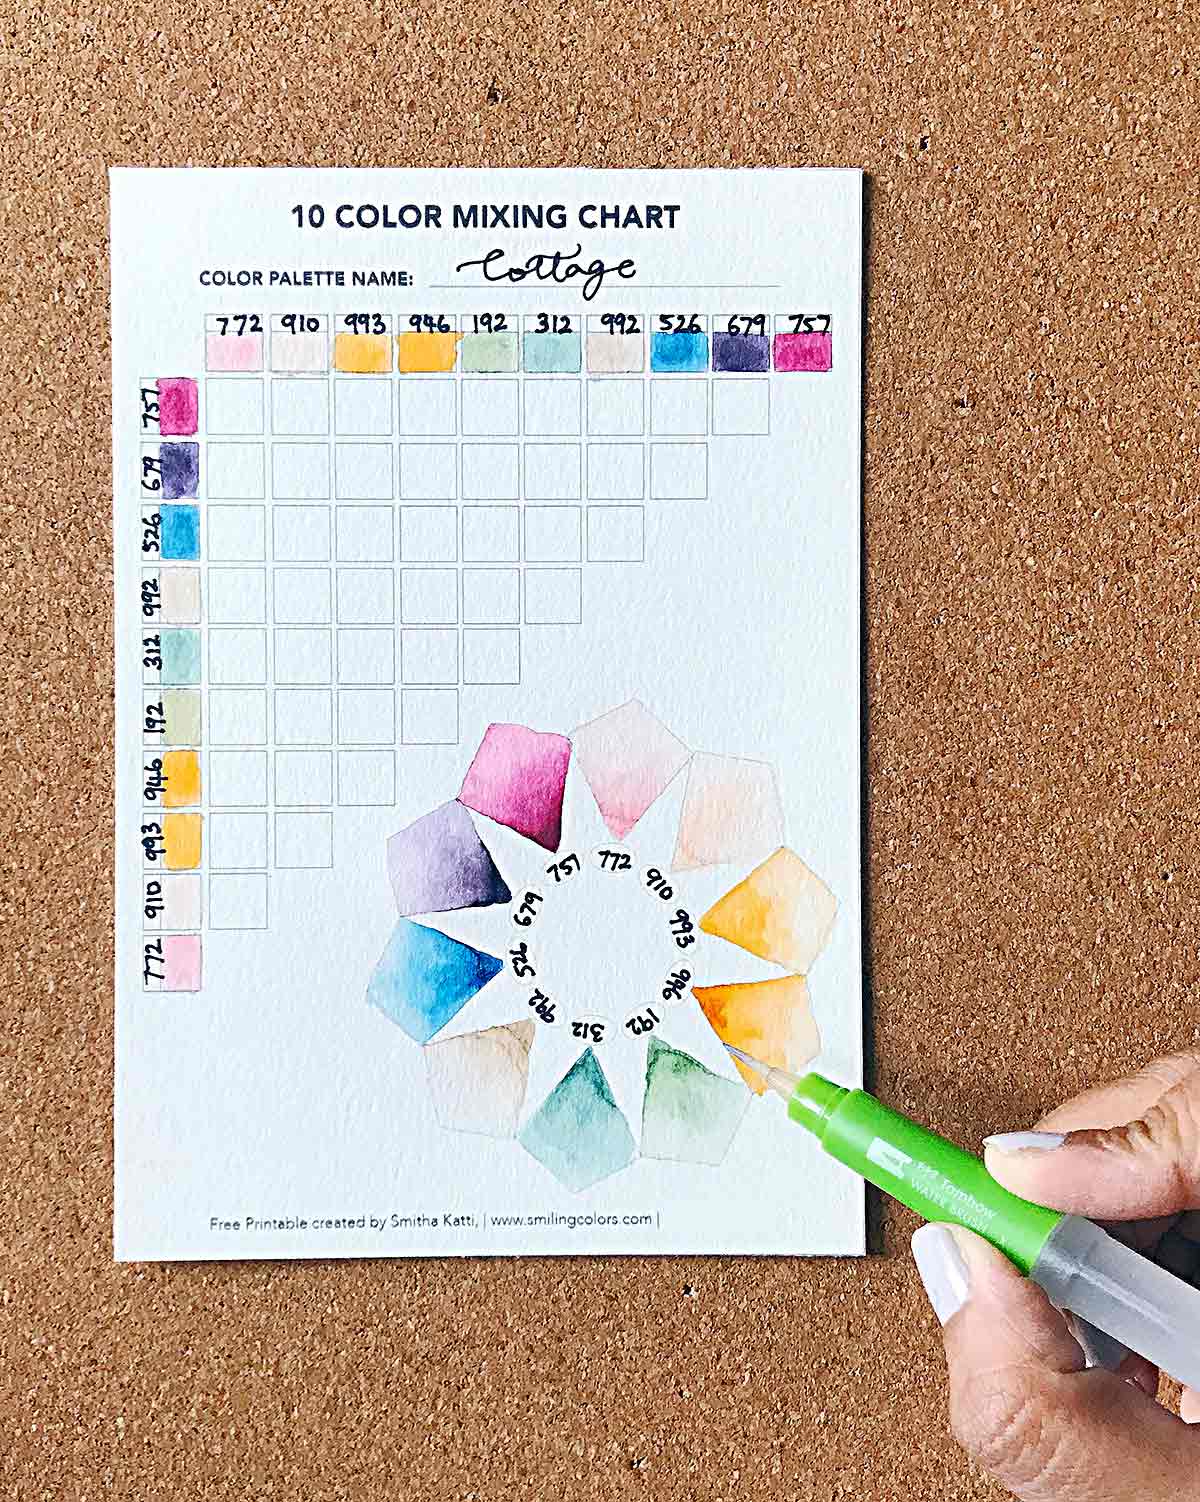 Free Color Mixing Chart Printable In 2 Sizes How To Use It Smiling Colors